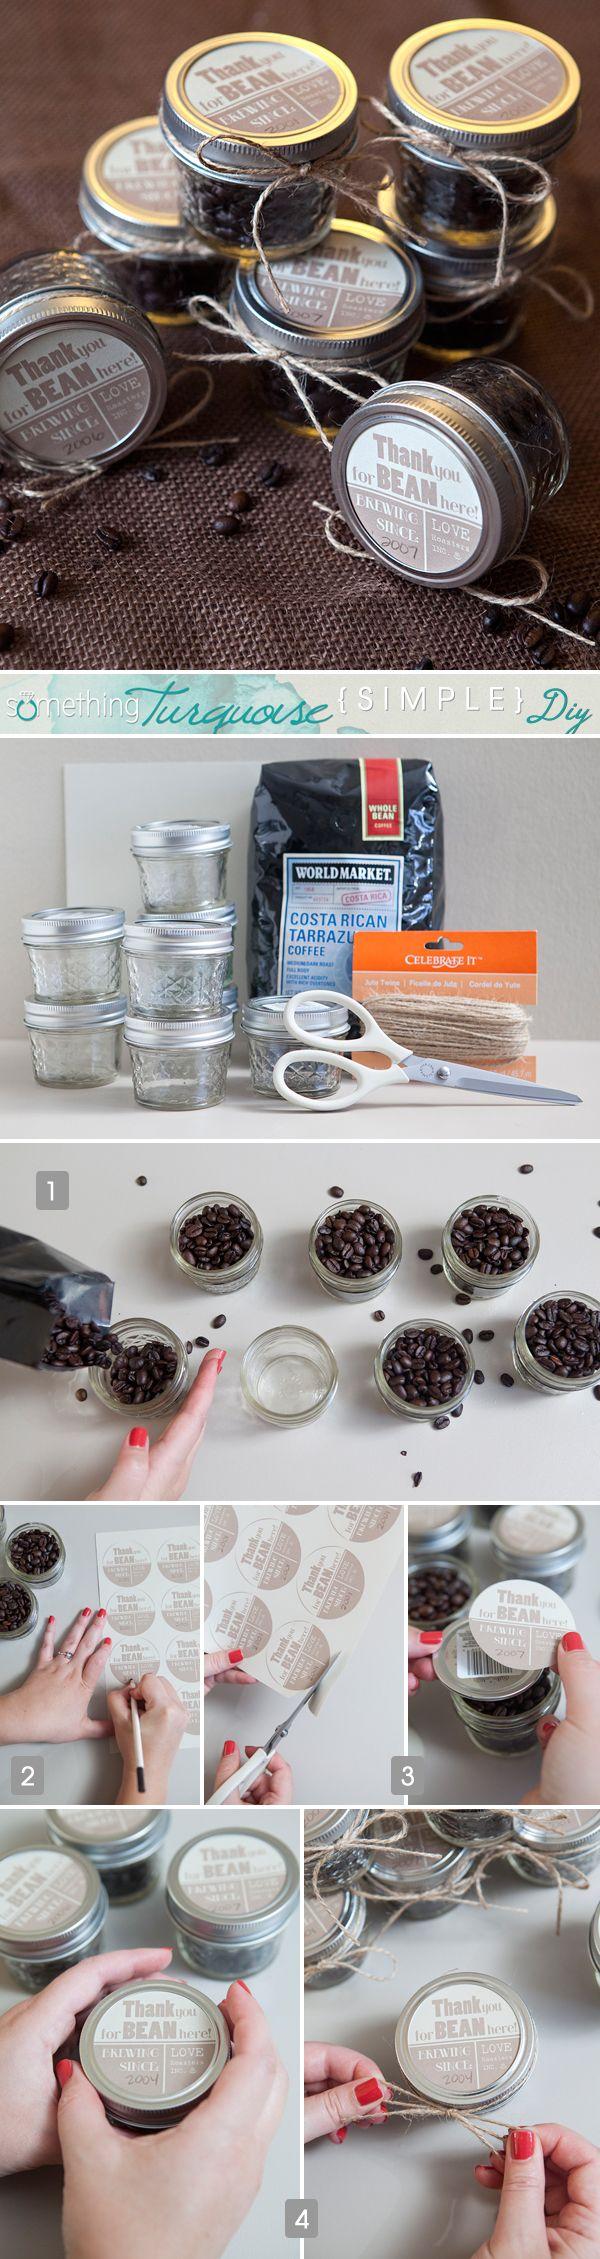 Wedding - Check Out These Adorable Coffee Bean Wedding Favors In Mason Jars!